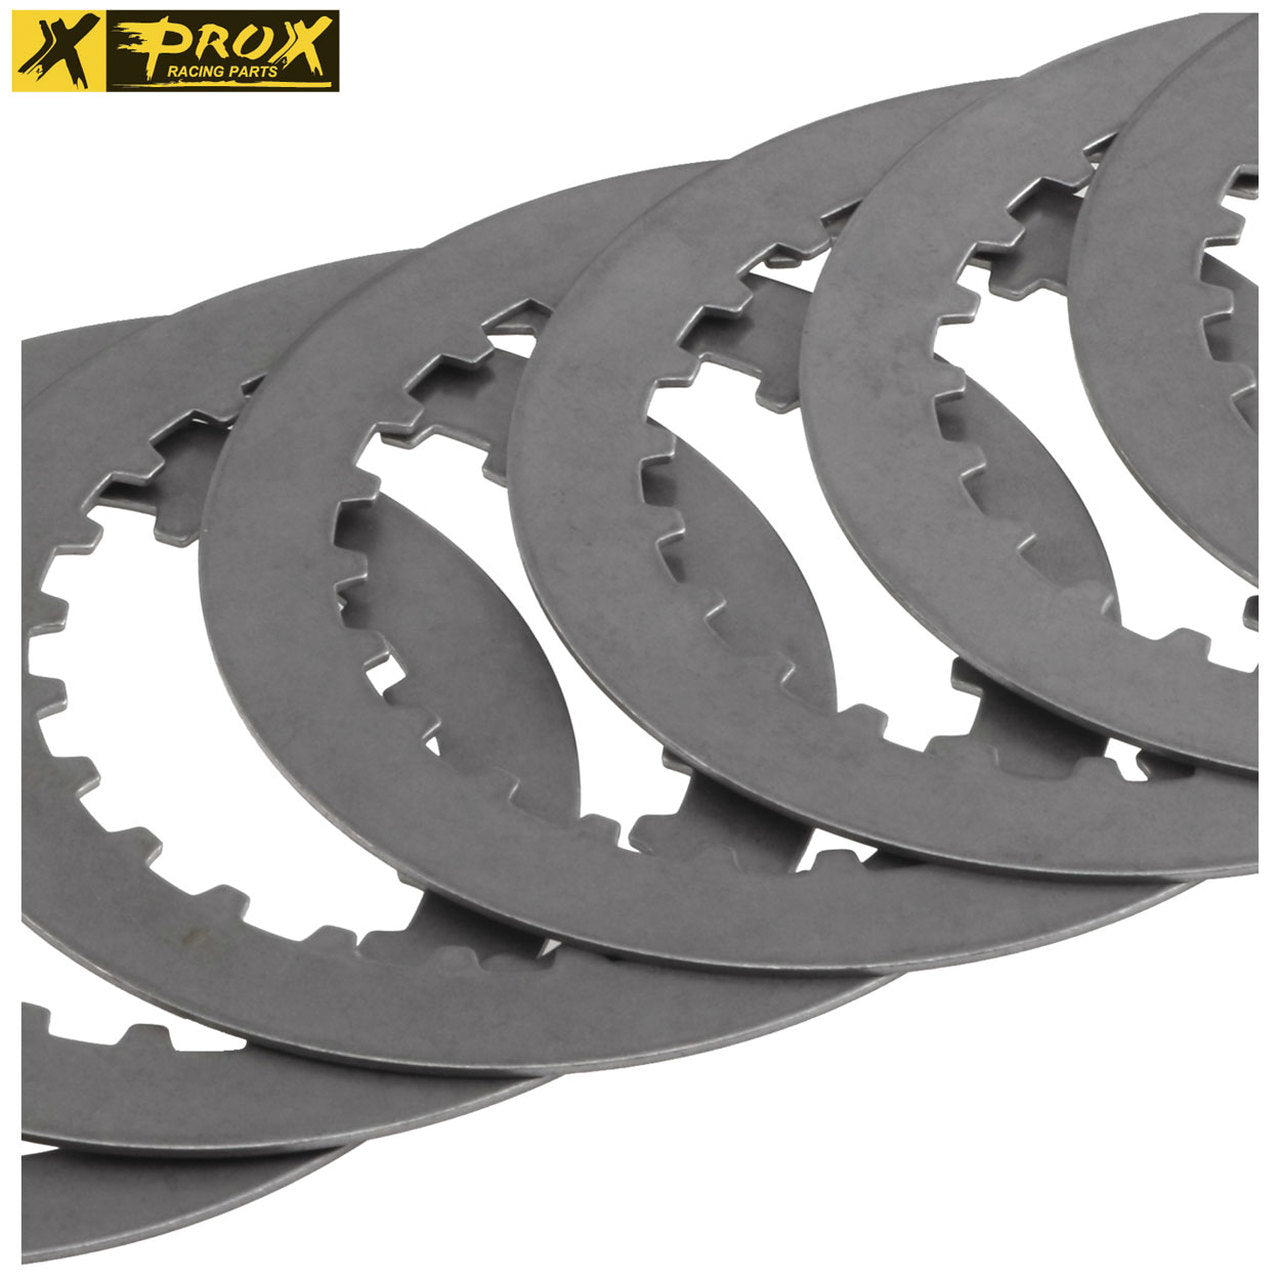 ProX Alloy/Steel Plate Set KTM125/144/150/200SX-EXC ’98-18 - ProX Racing Parts